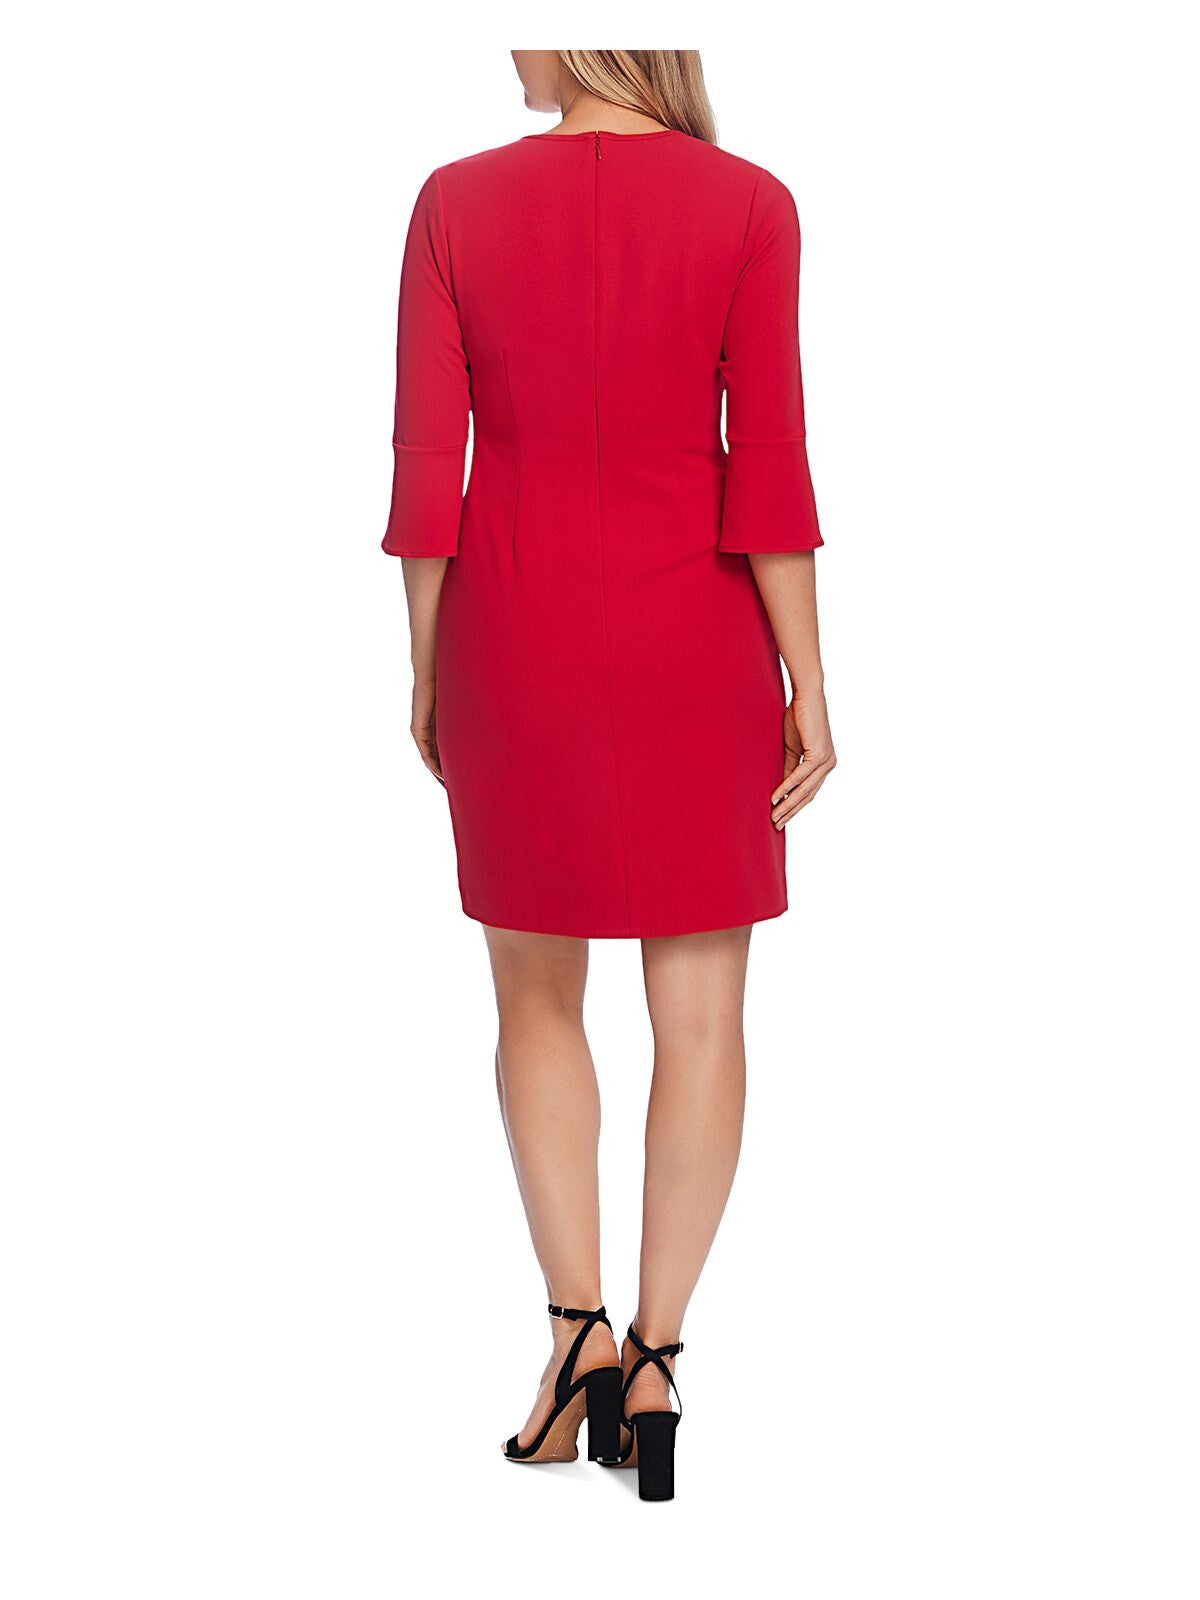 VINCE CAMUTO Womens Red Bell Sleeve Keyhole Short Cocktail Sheath Dress XS